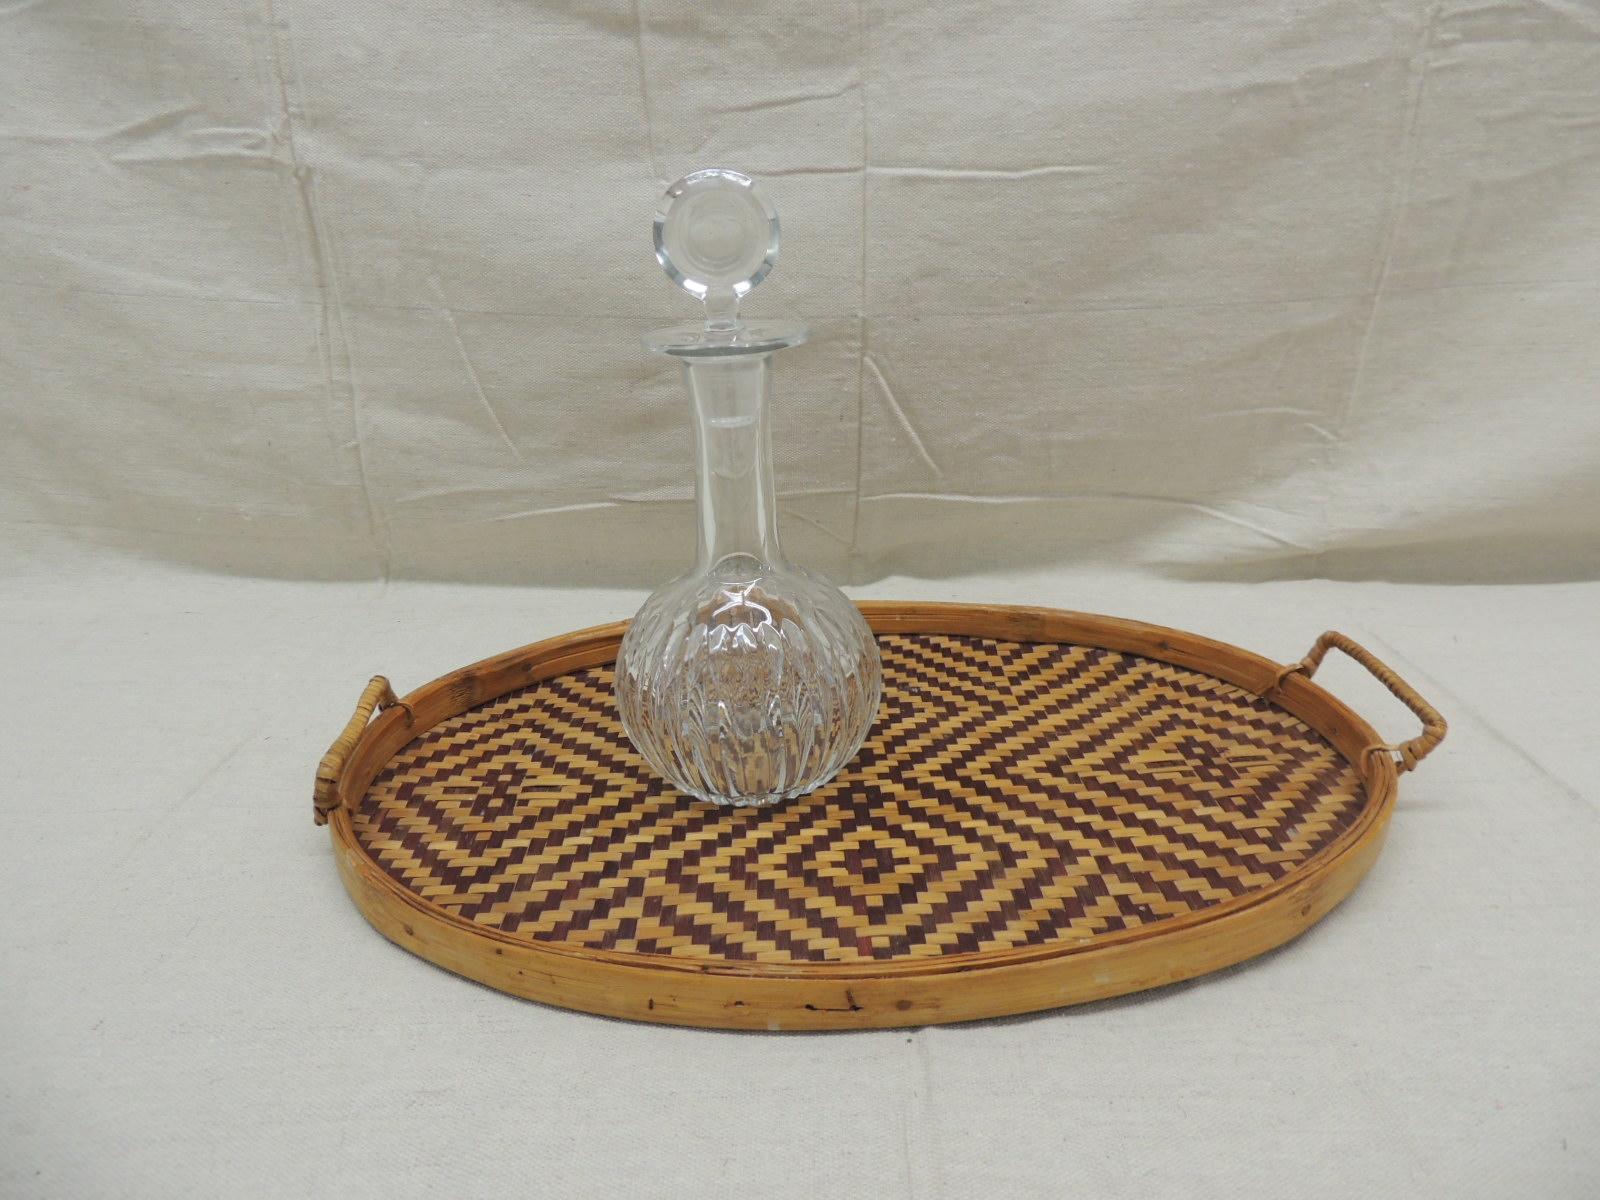 Vintage oval rattan and bamboo serving tray with handles
Woven brown and tan diamond pattern
Size: 17.5 x 12.5 x 2 H (to the top of the handle).